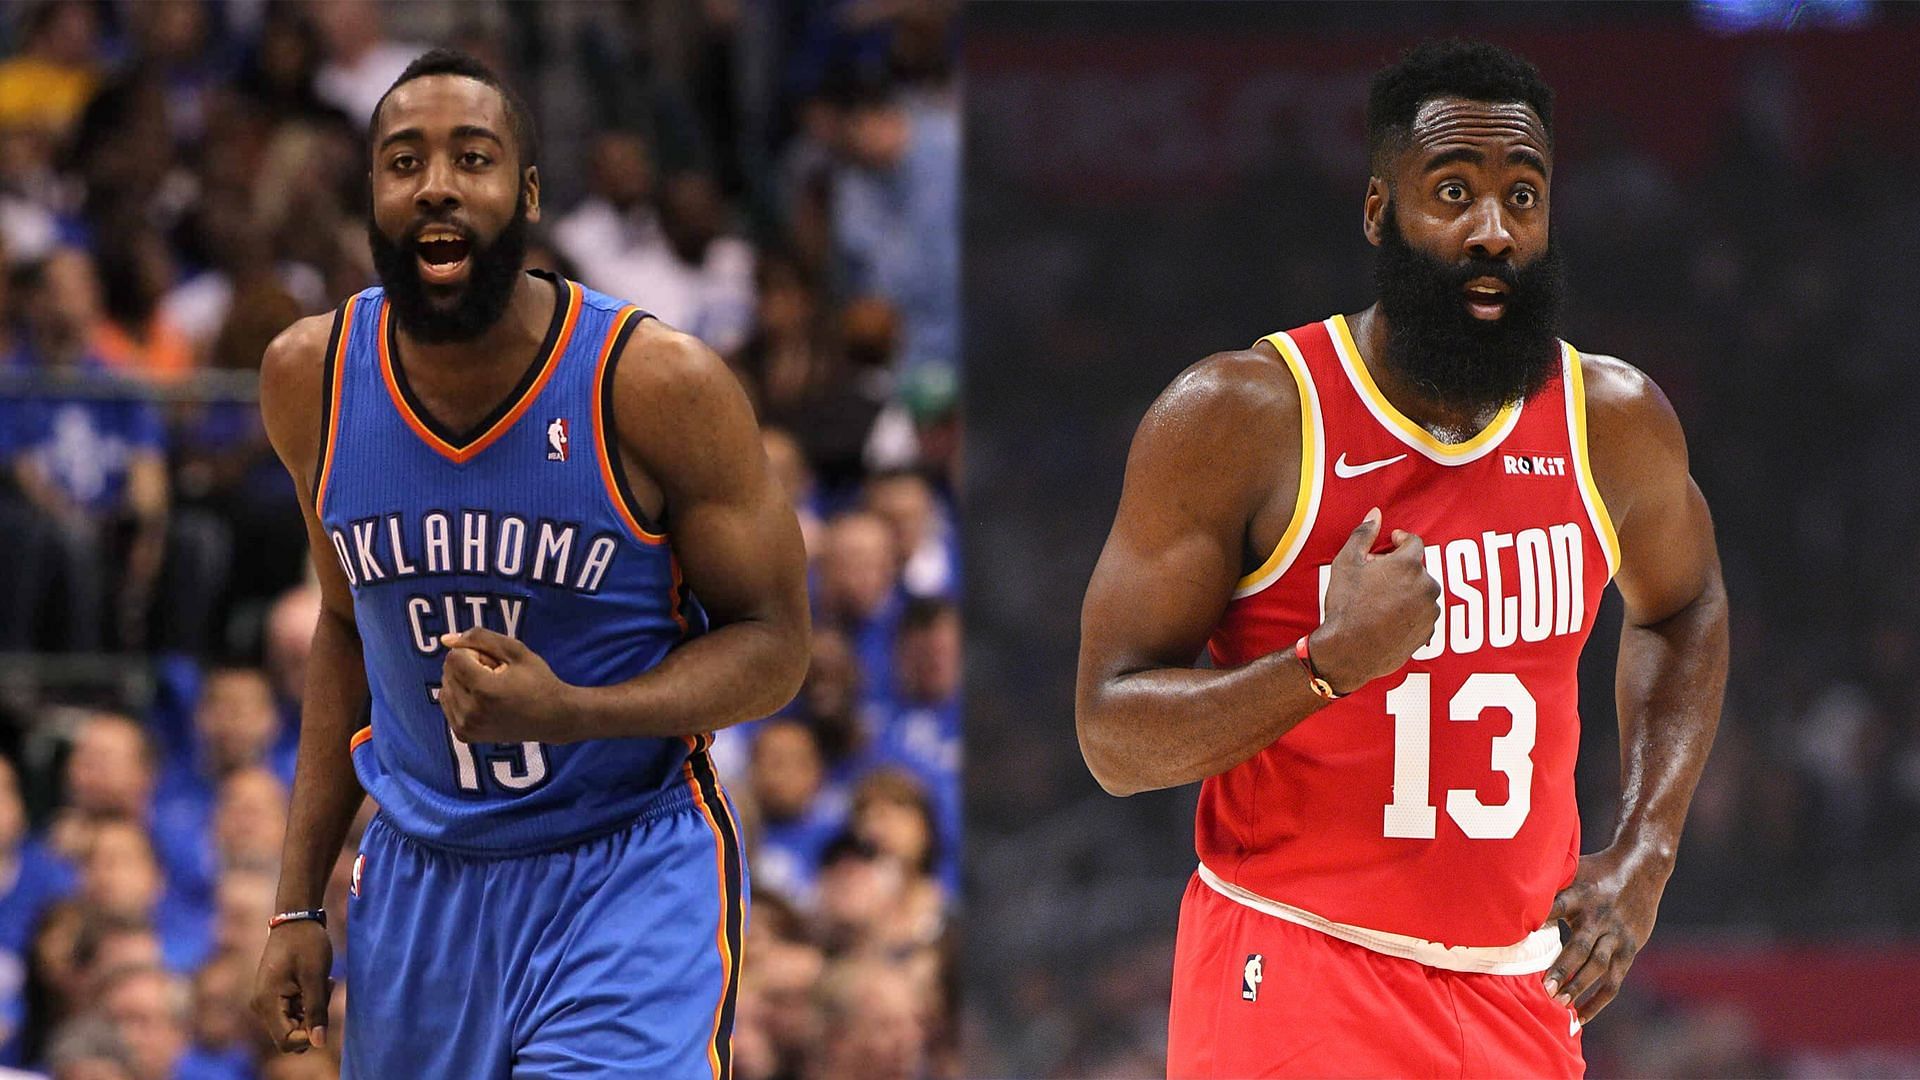 Harden became one of the best NBA players during his time in Houston